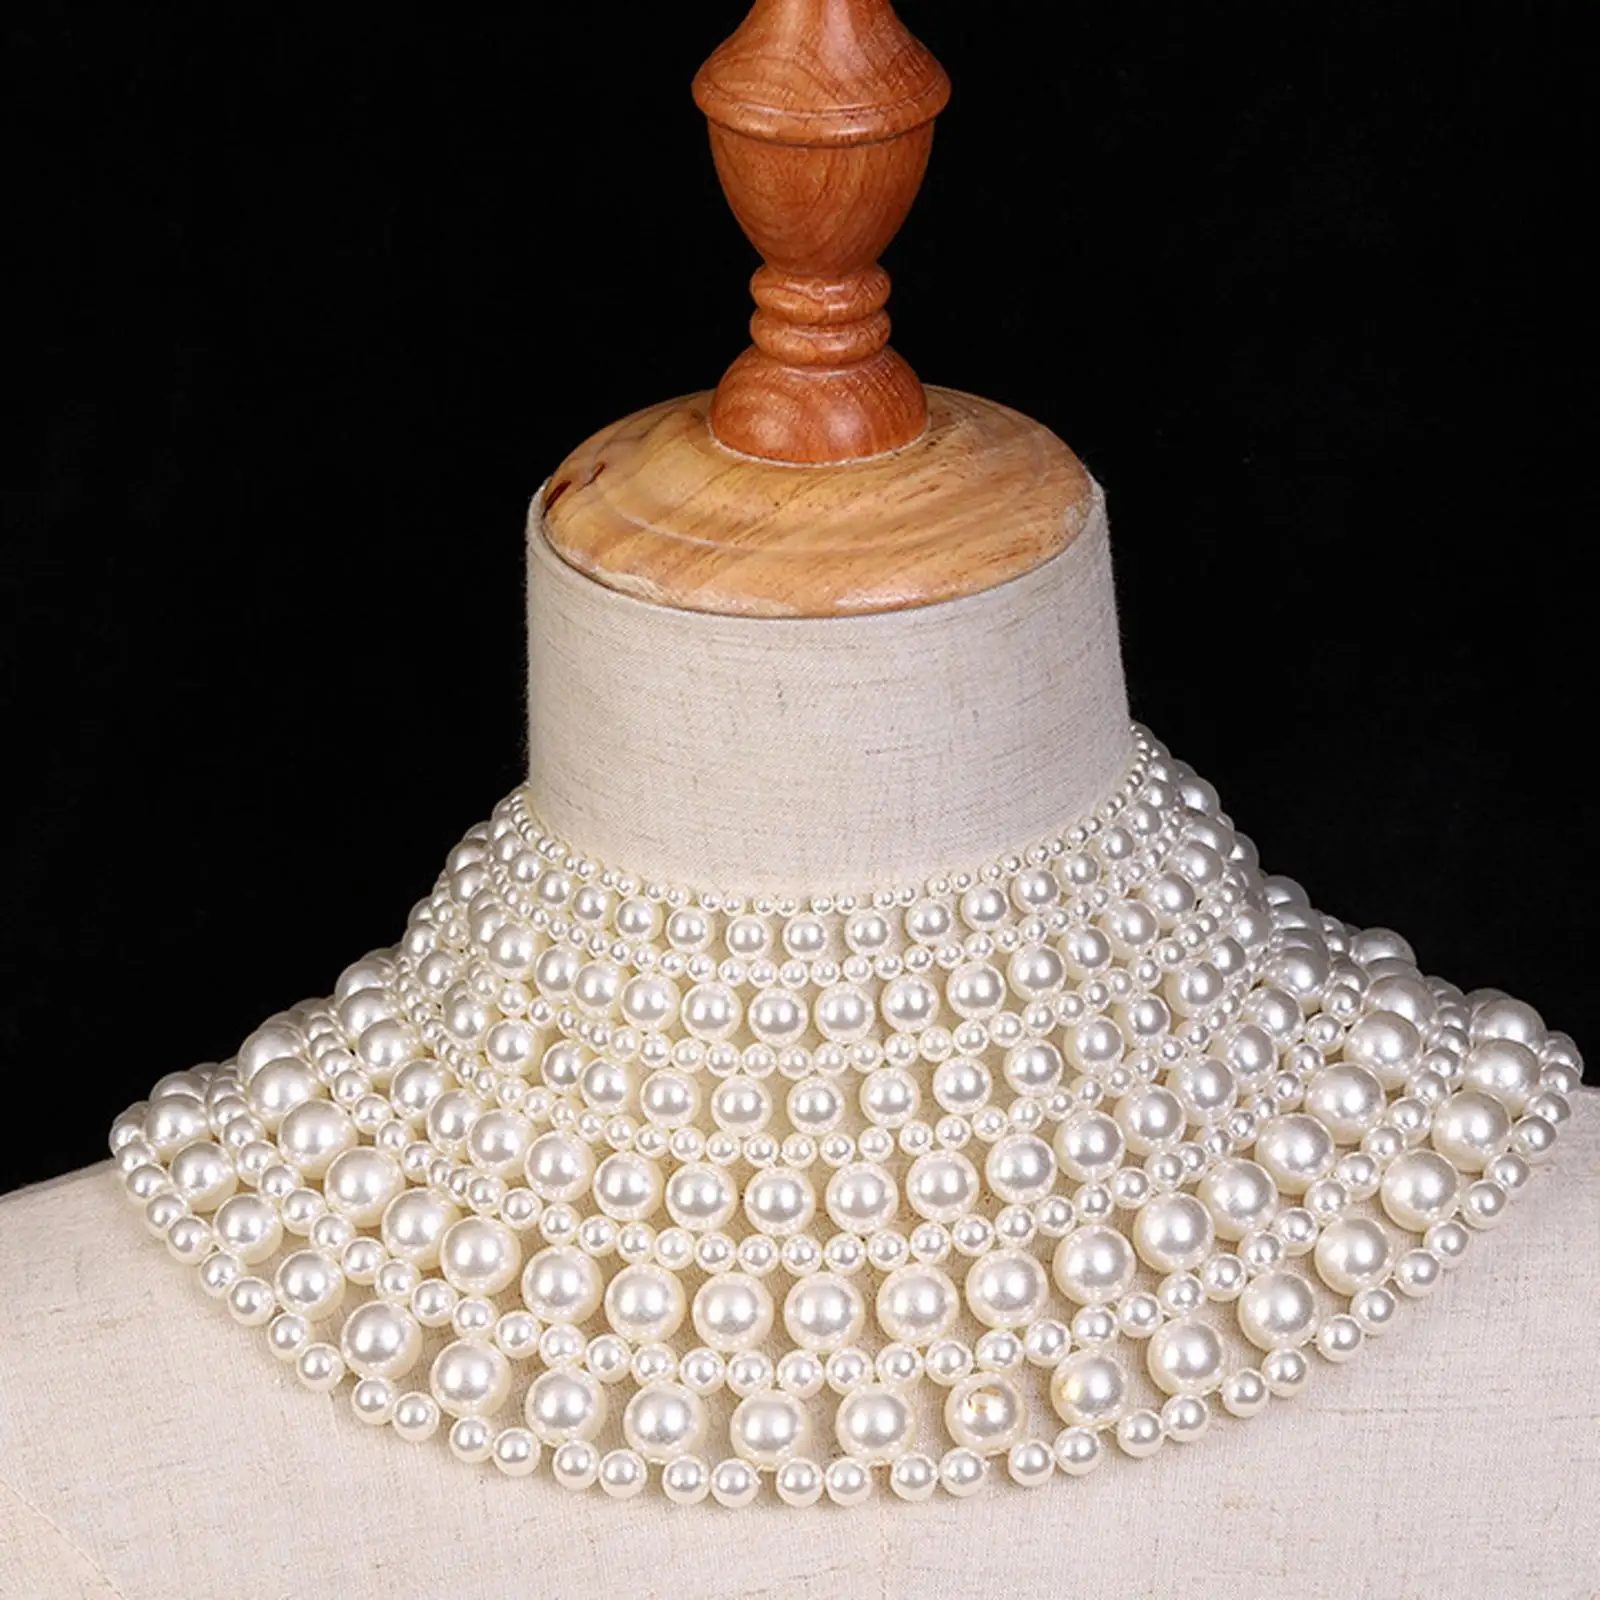 Vintage Multi Layer Imitation Pearl Necklace Adjustable for Mom/Wife/Sister